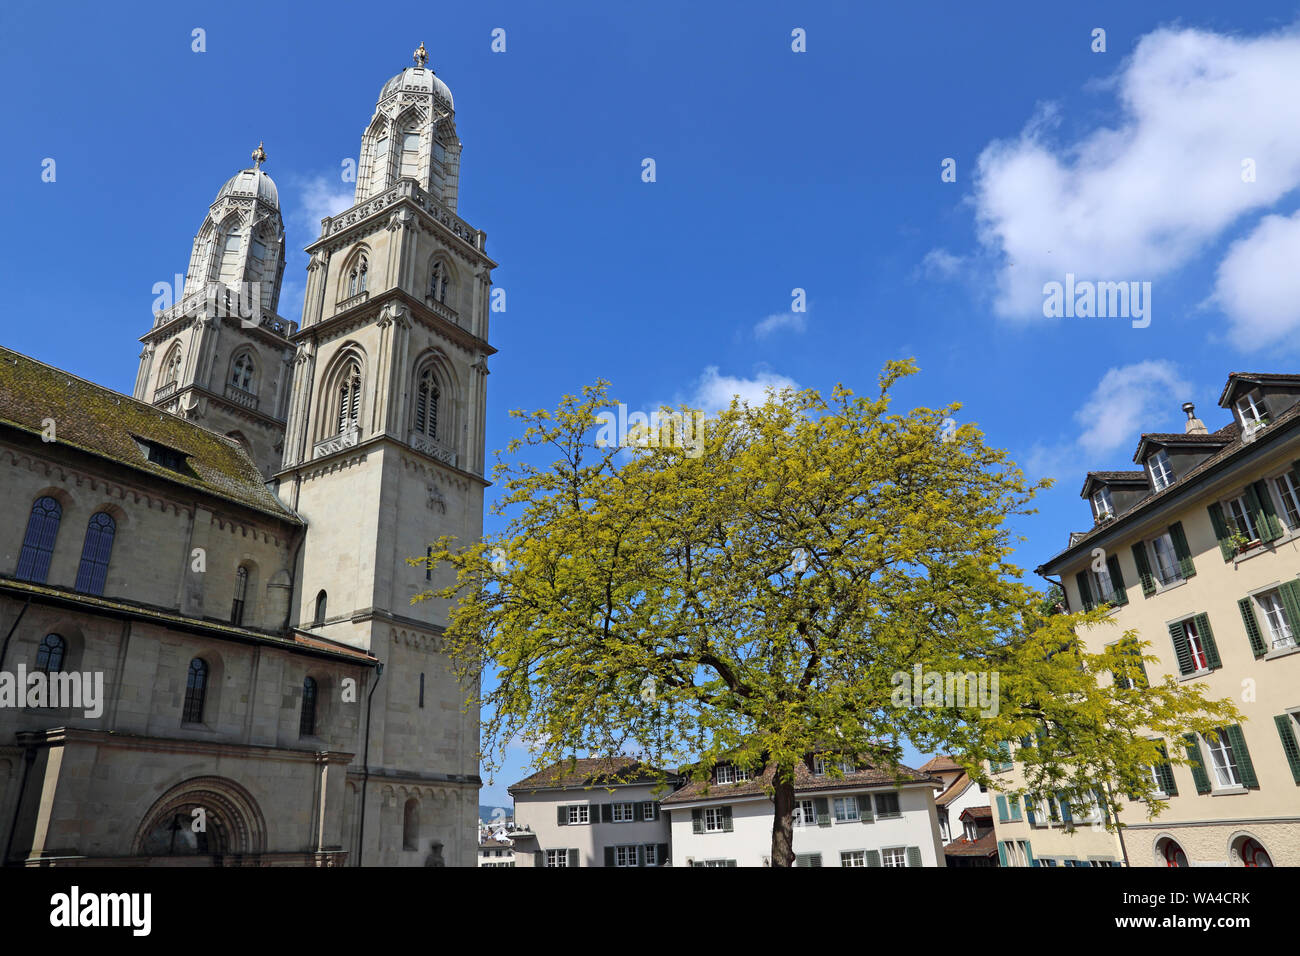 A tree a the Romanesque-style Grossmunster ('great minster') church, located in Zurich, Switzerland. Stock Photo